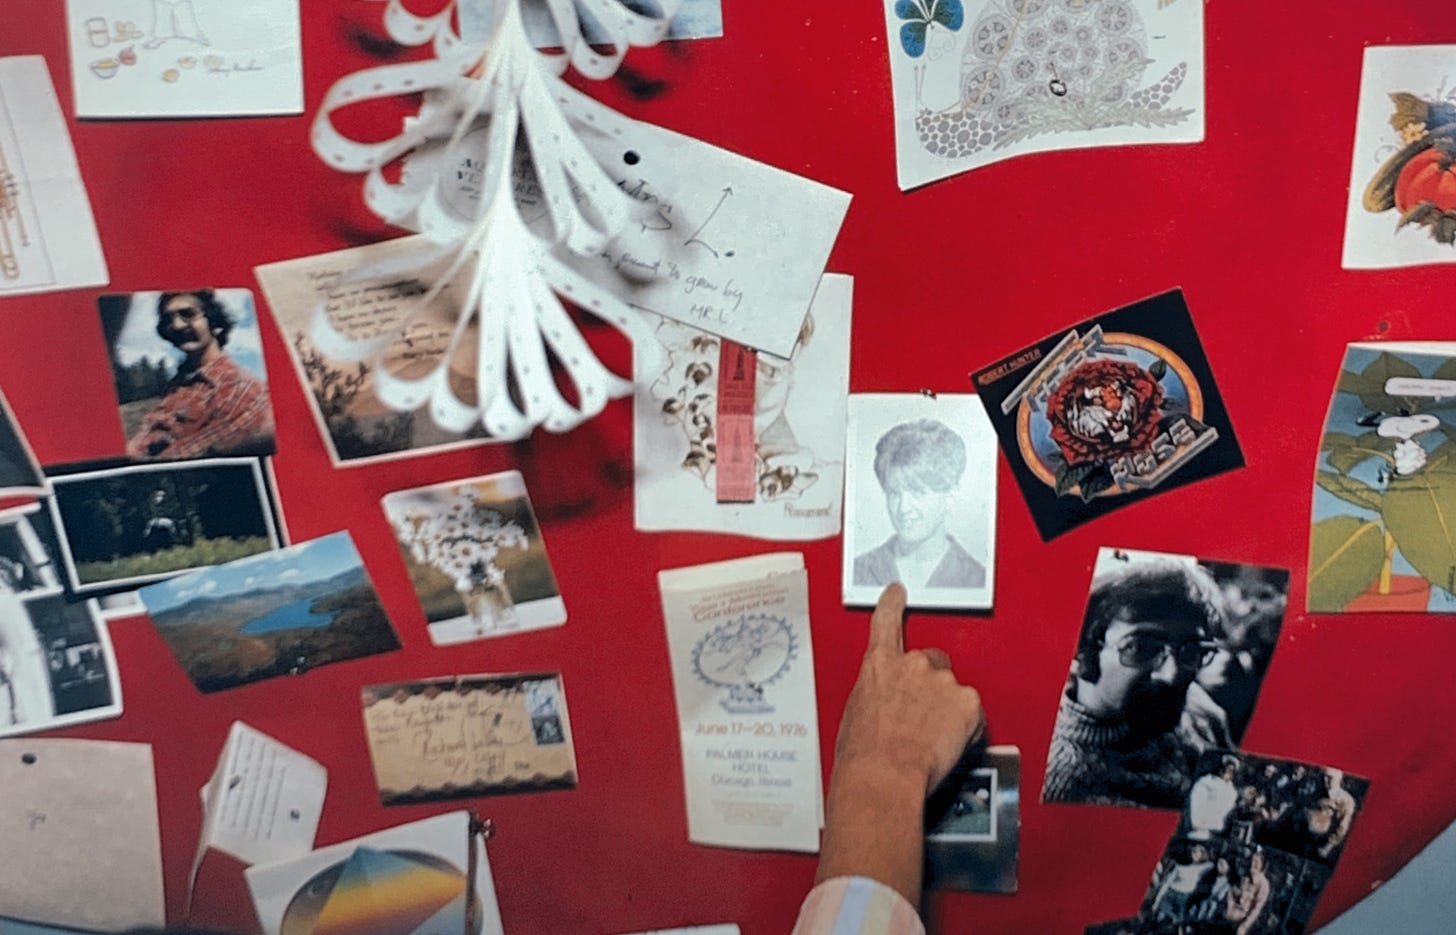 red background with many photographs, postcards, notes with a hand coming from out of frame pointing at a black and white photograph of a senior photo